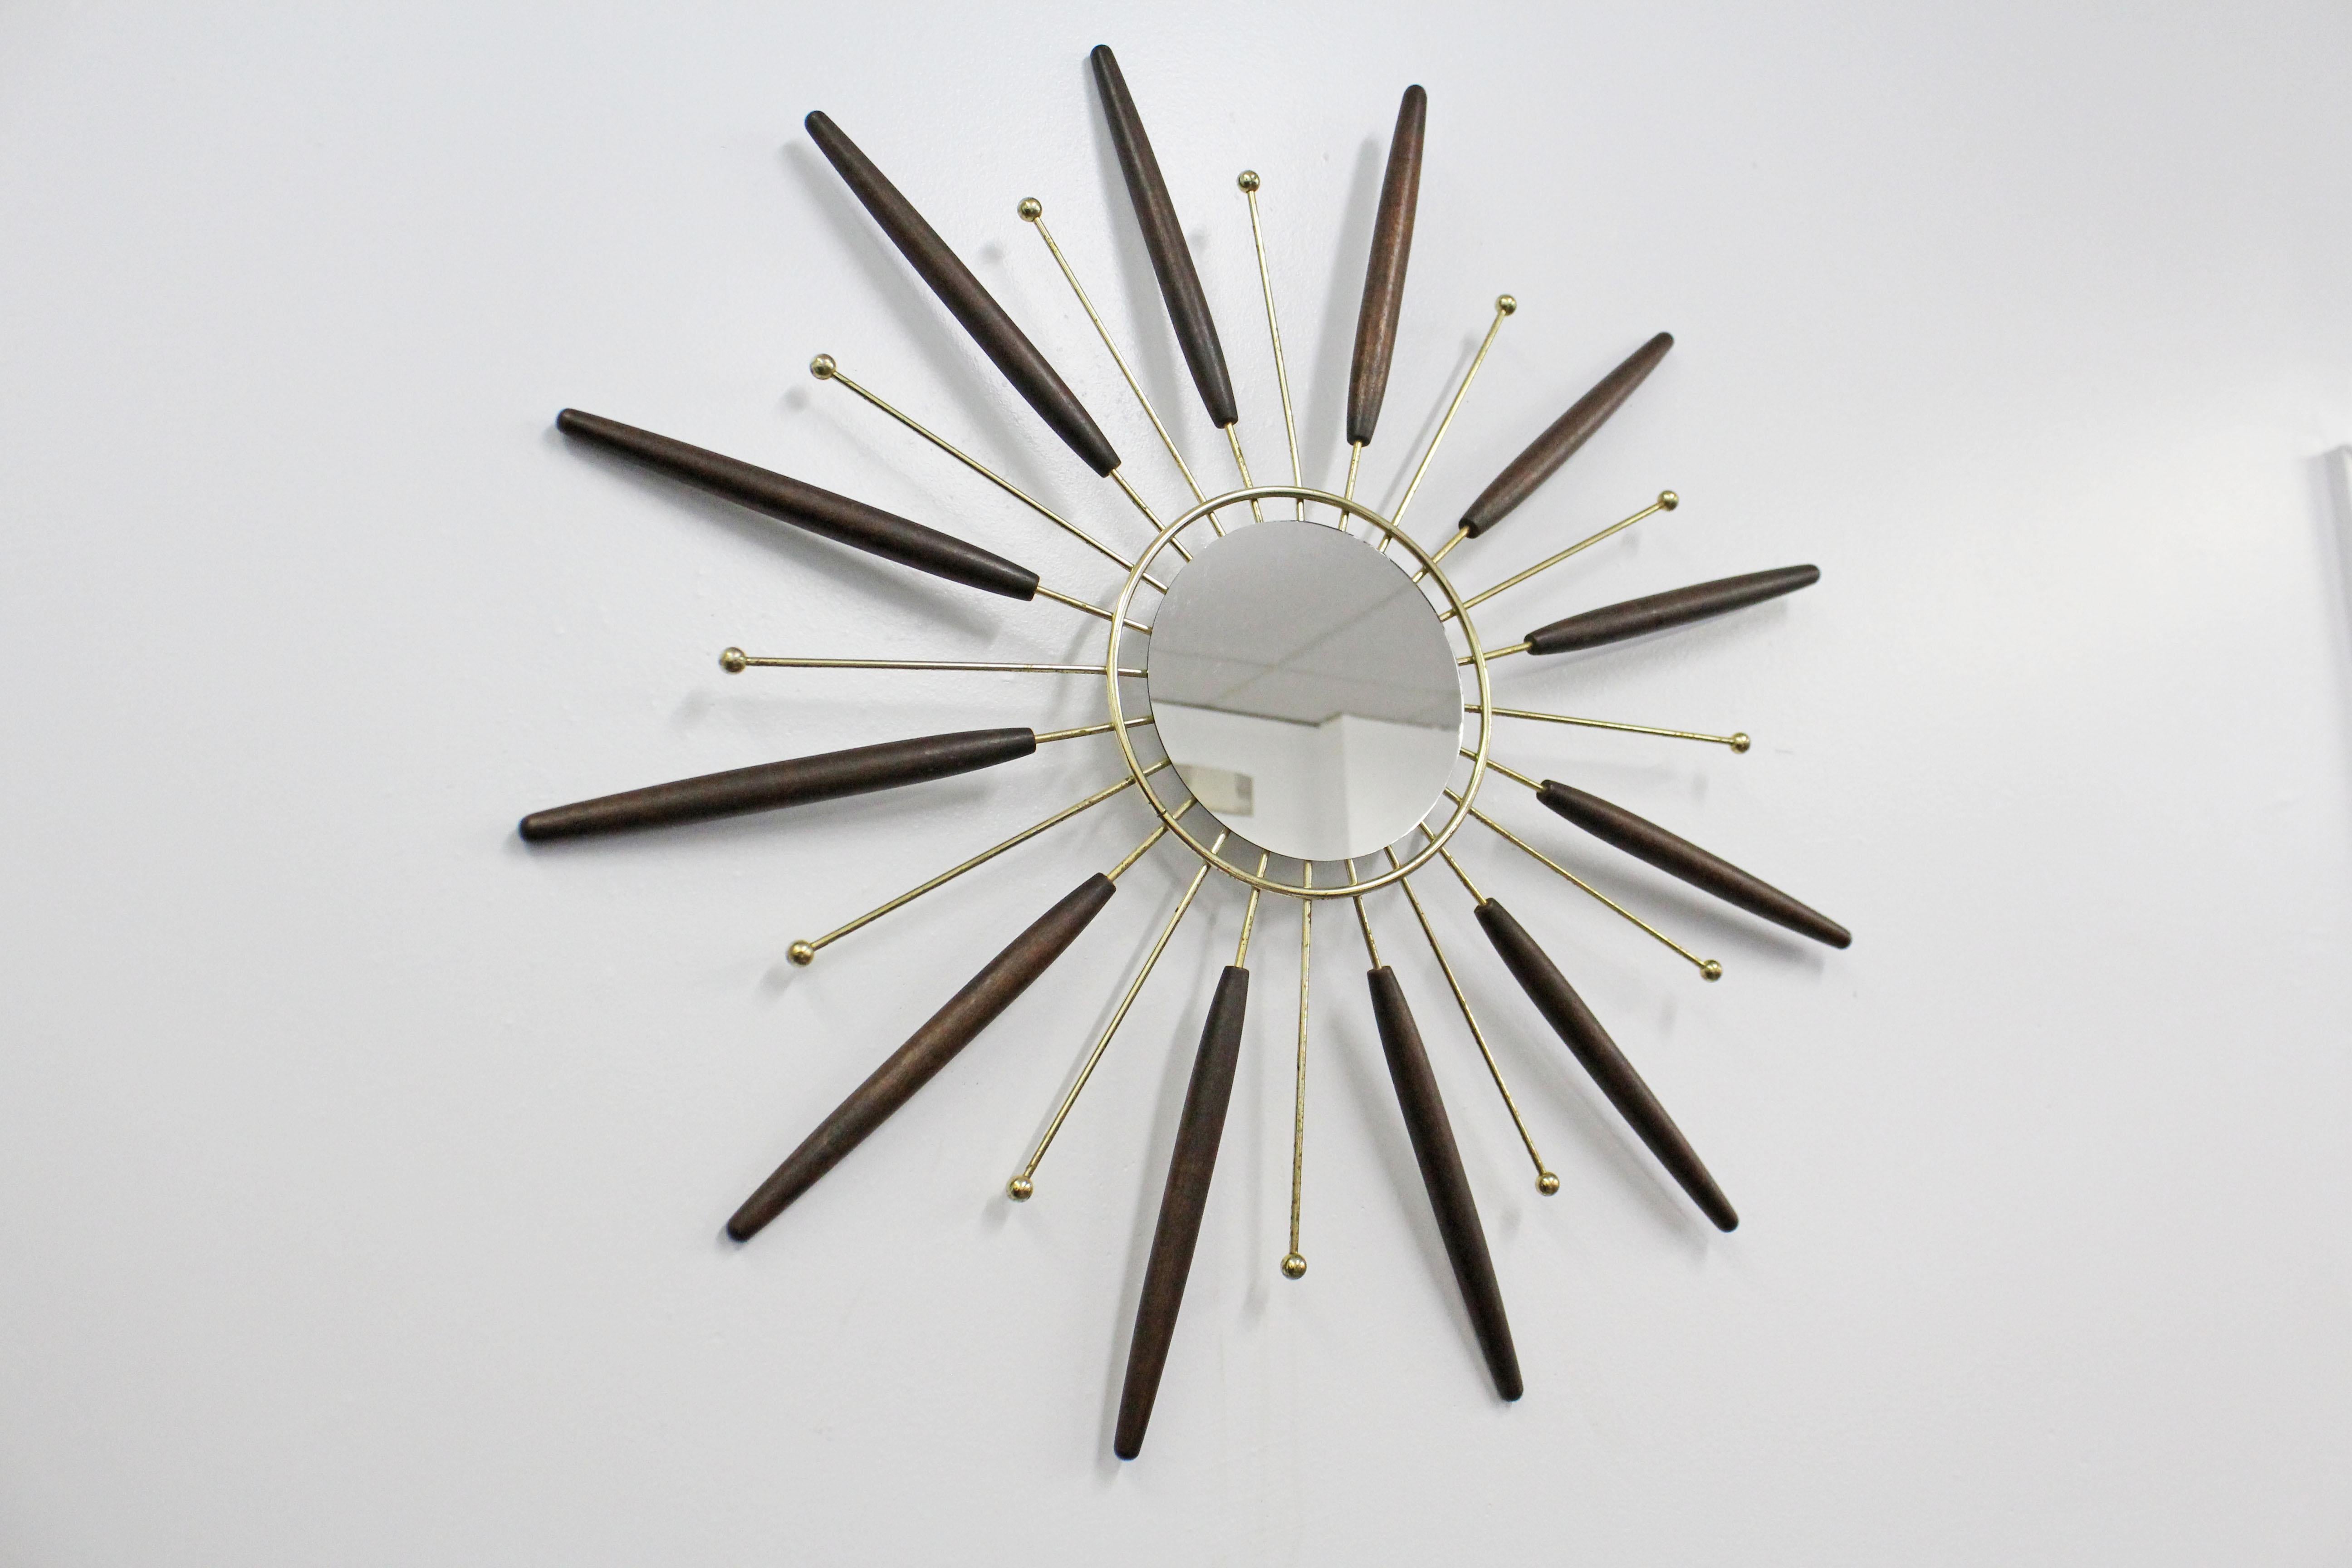 Offered is a super unique, vintage midcentury wall mirror in the shape of a 